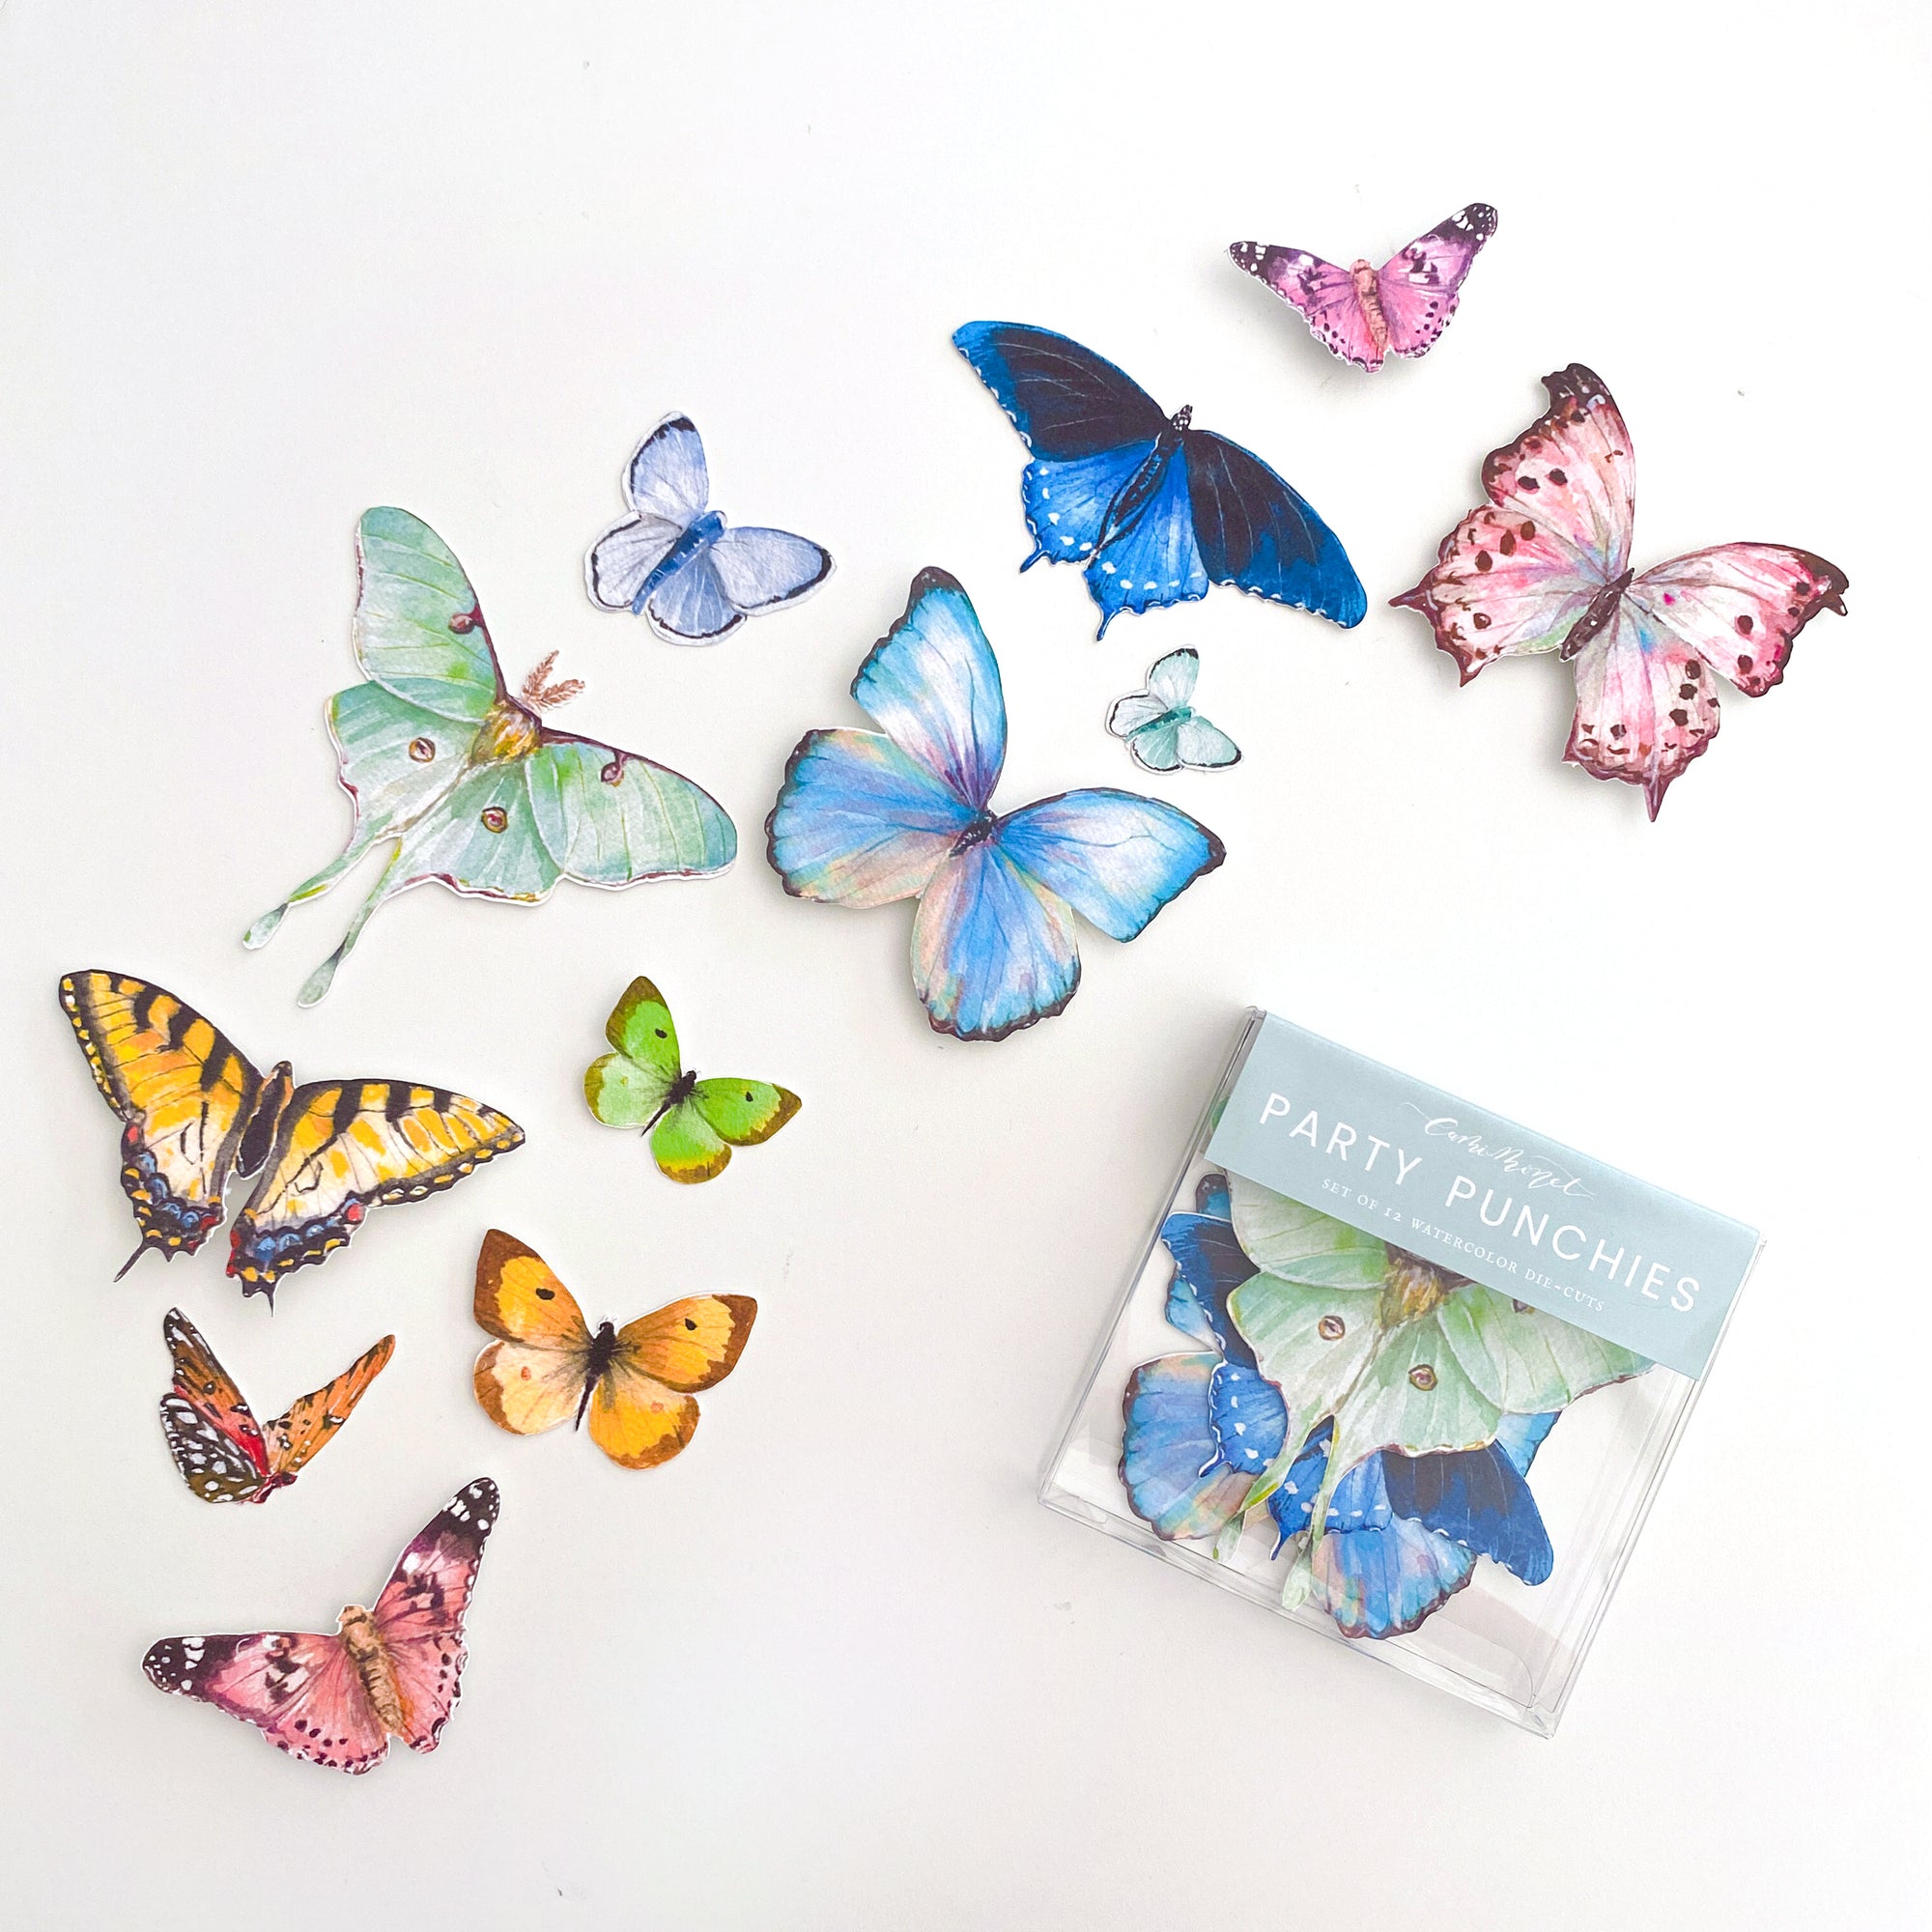 Rainbow Butterfly Party Punchies